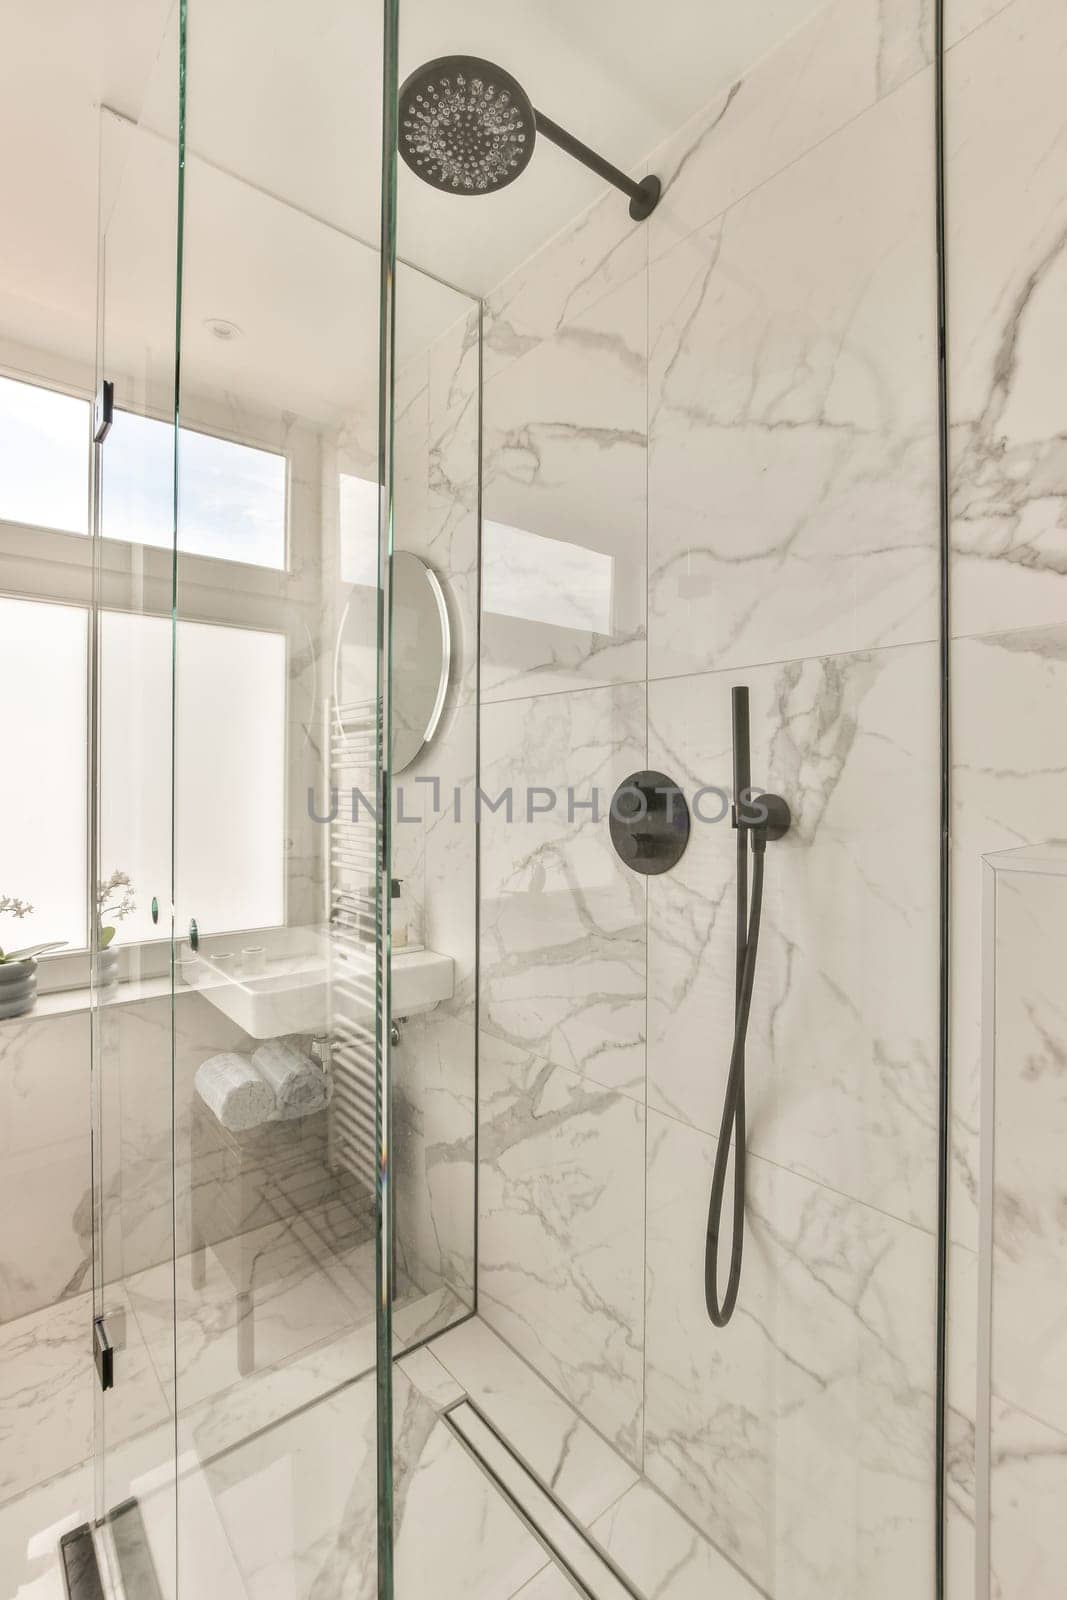 a bathroom with white marble walls and flooring, including a glass shower door that is open to the bathtub